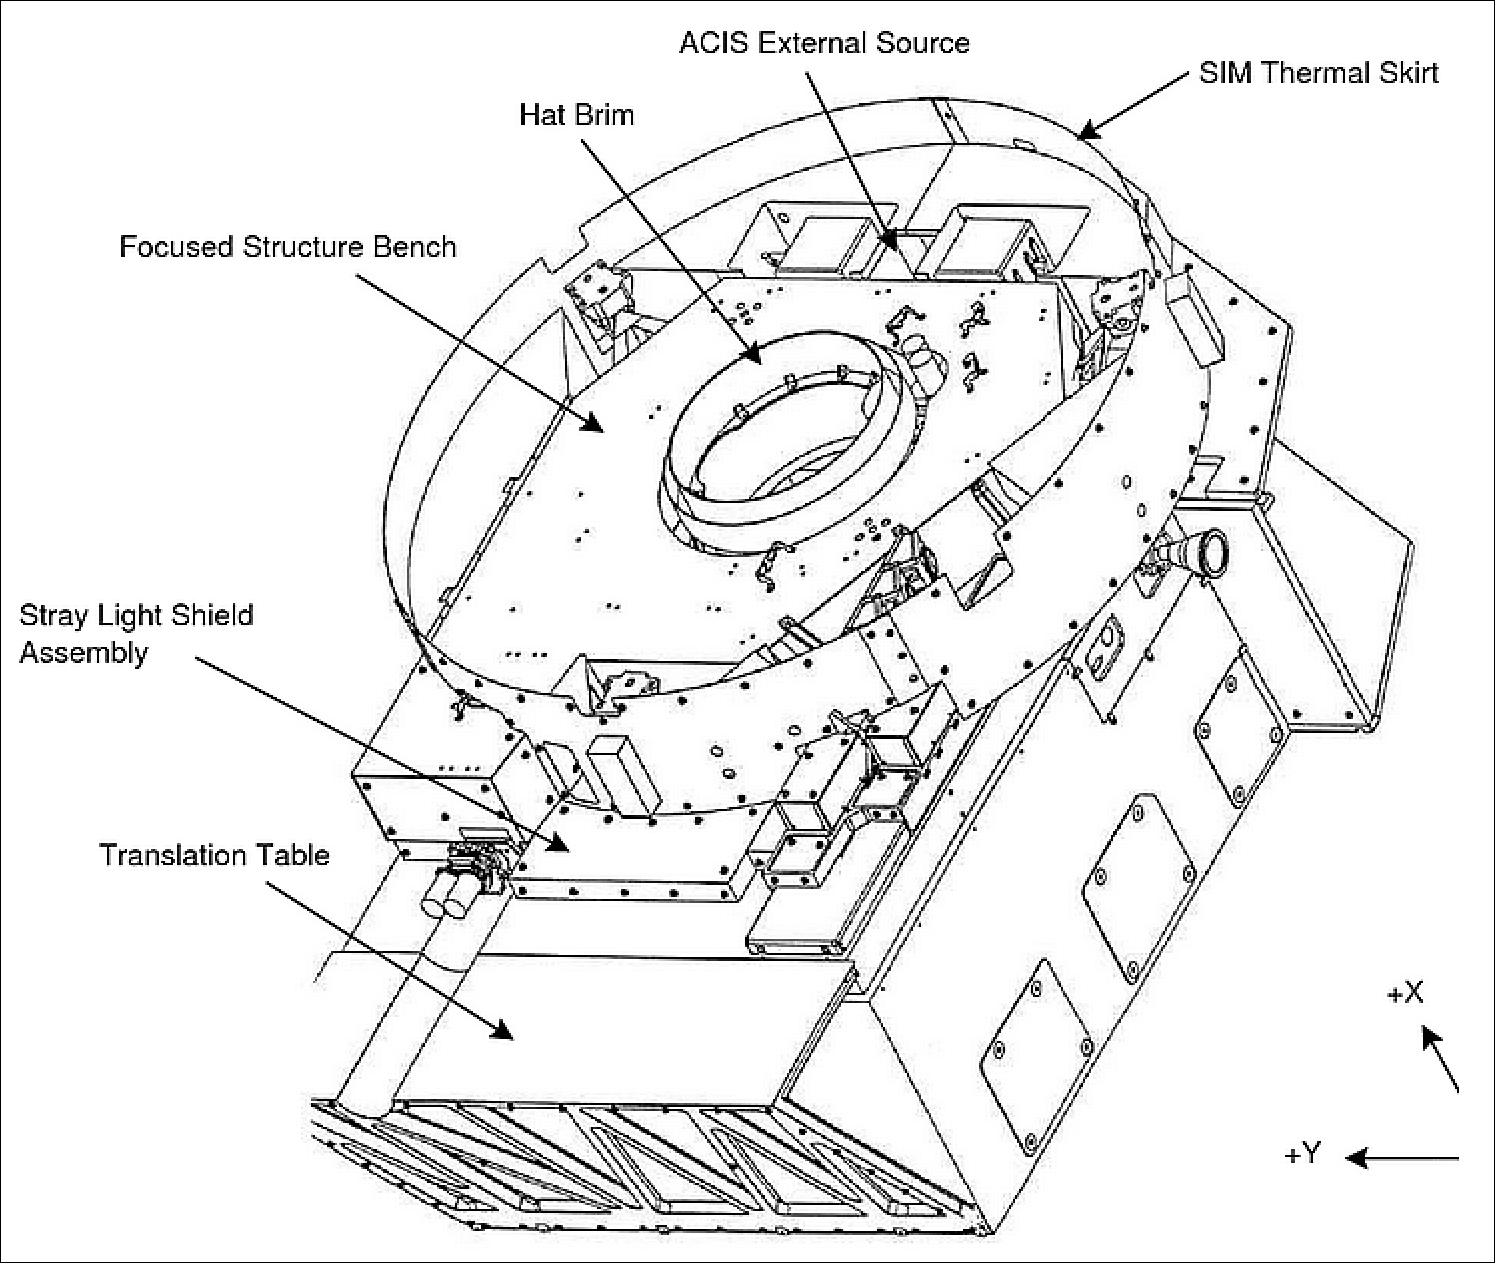 Figure 58: A schematic of the SIM (Science Instrument Module), image credit: SAO